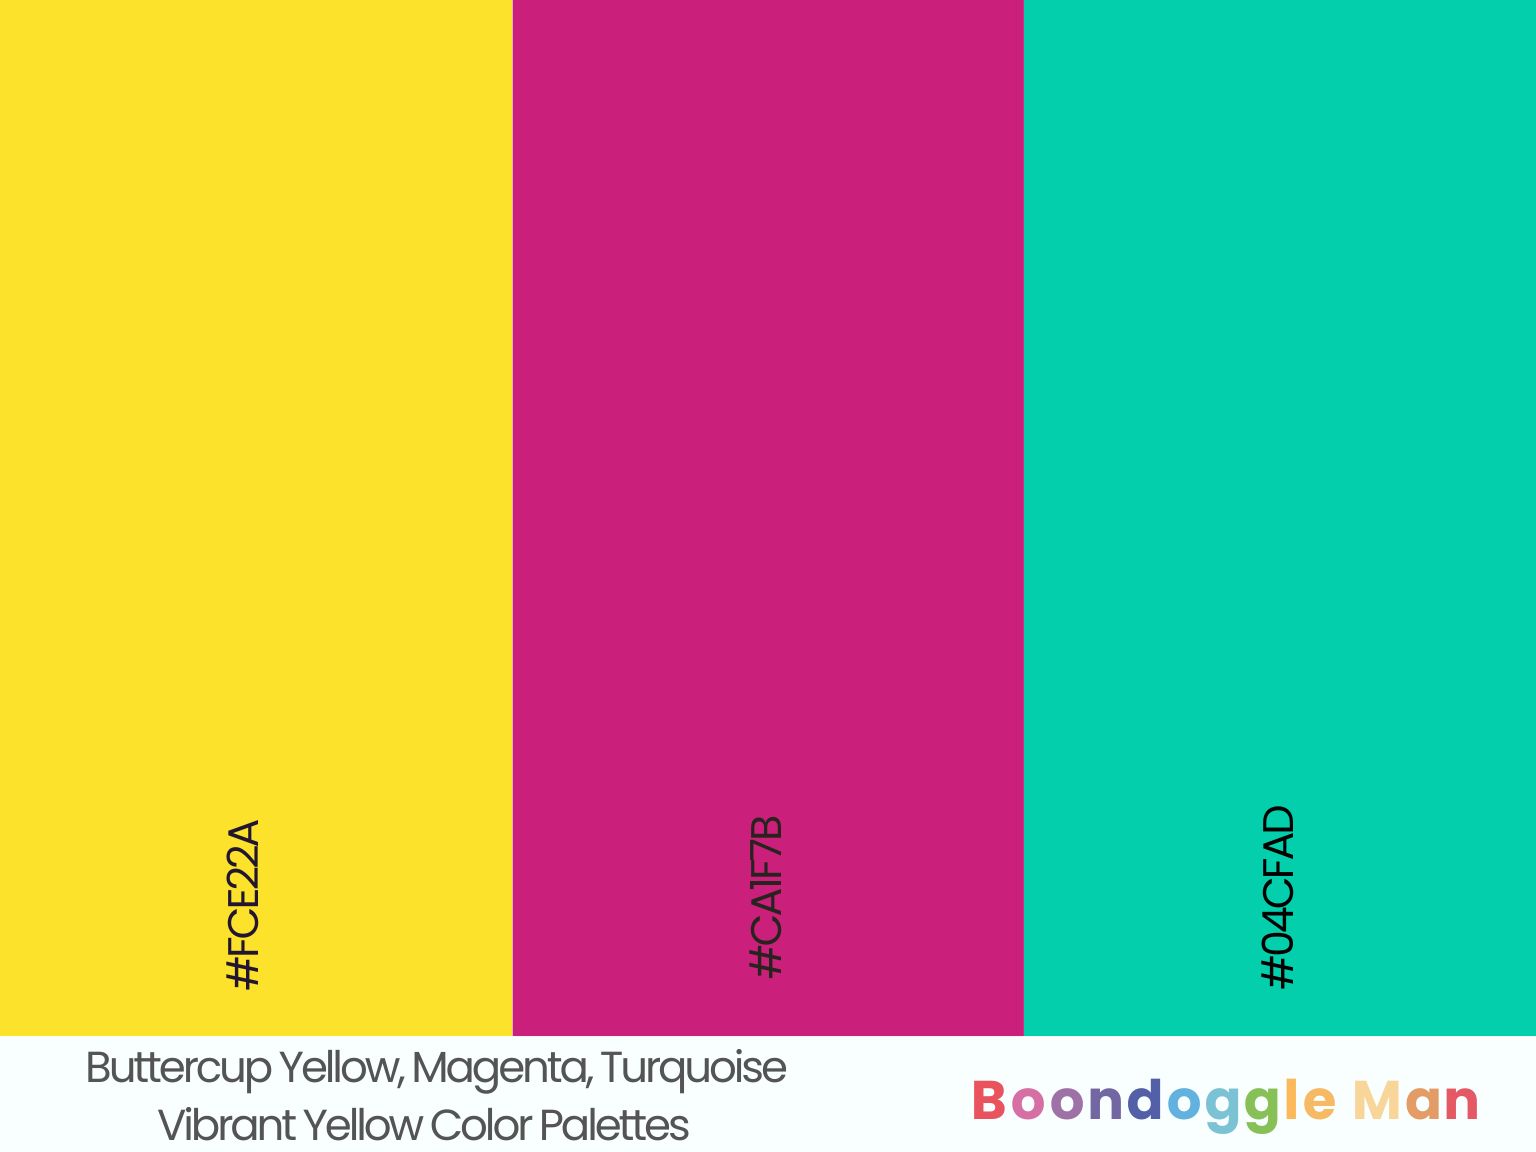 Buttercup Yellow, Magenta, Turquoise